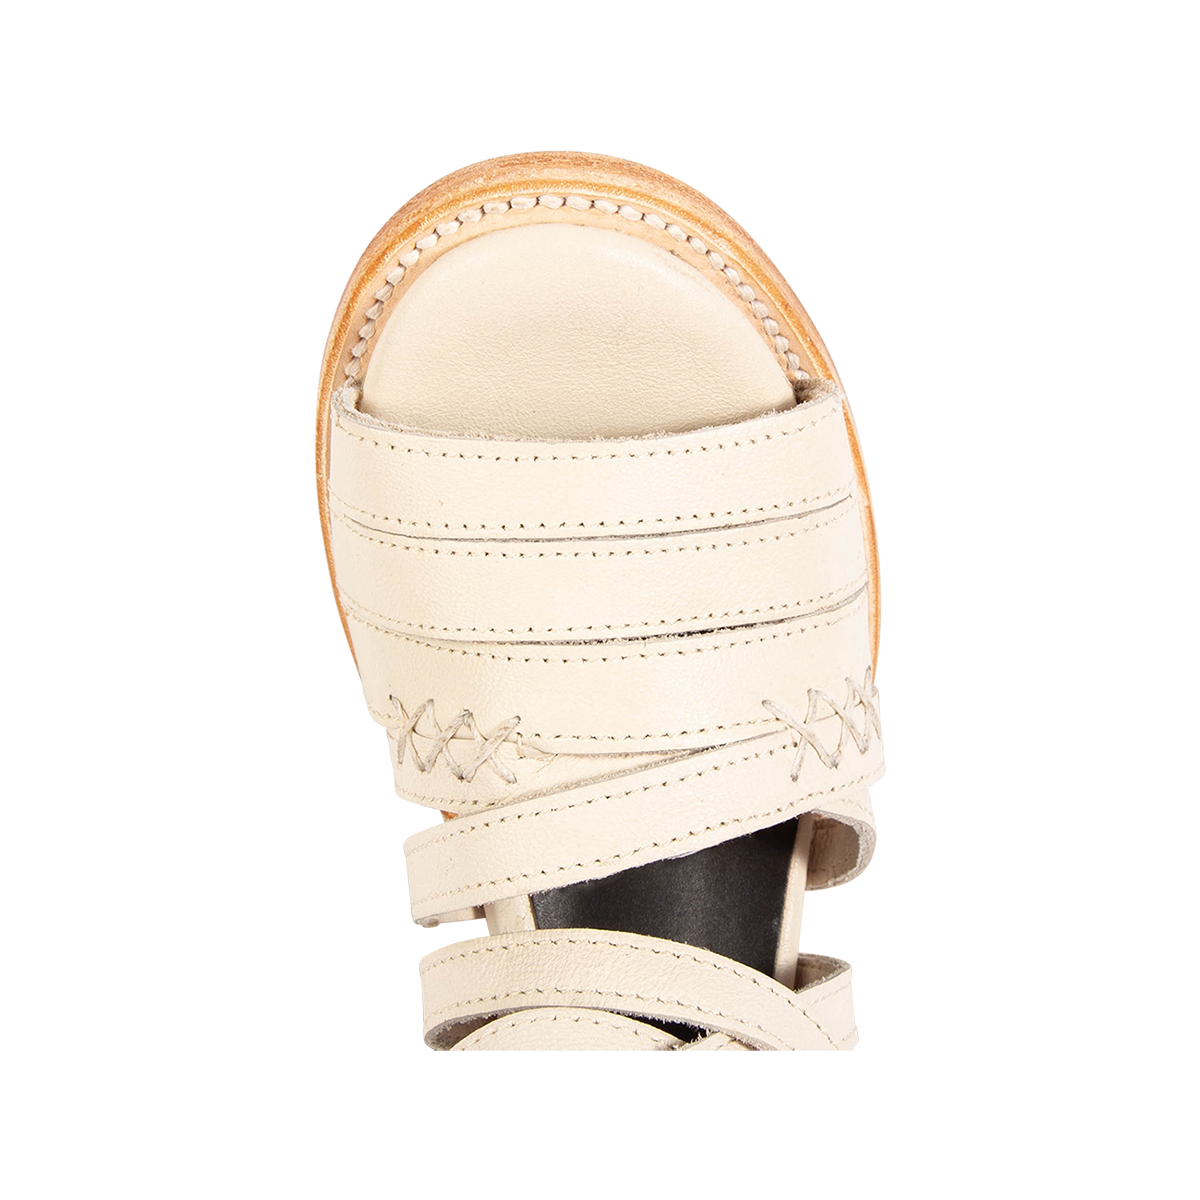 Top view showing a rounded toe and leather straps on FREEBIRD women's Makayla beige leather sandal 